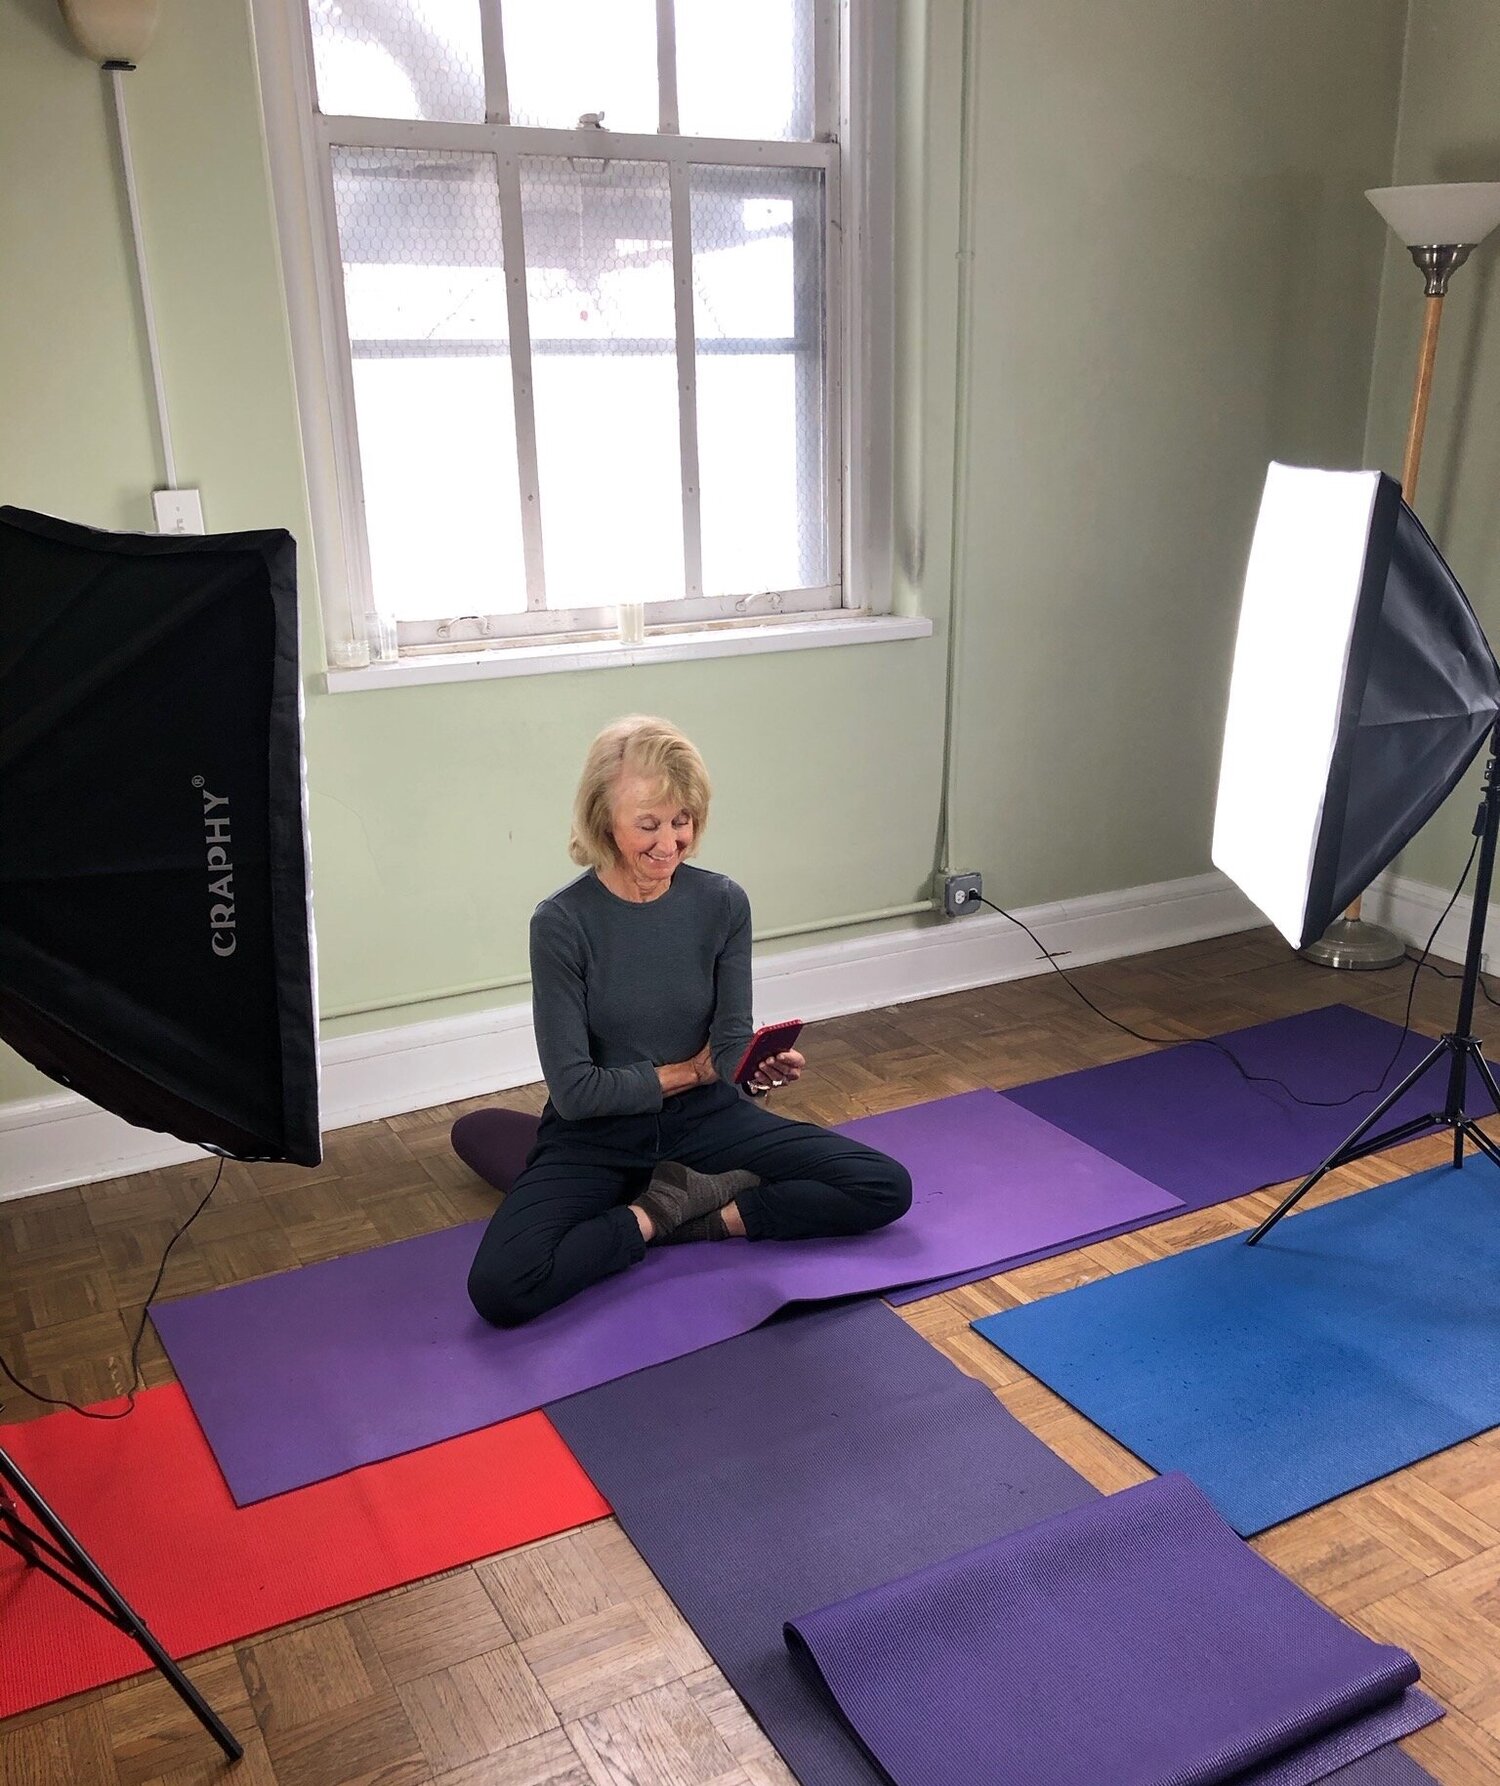 Online Yoga With Laura Jane Mellencamp Yoga Among Friends